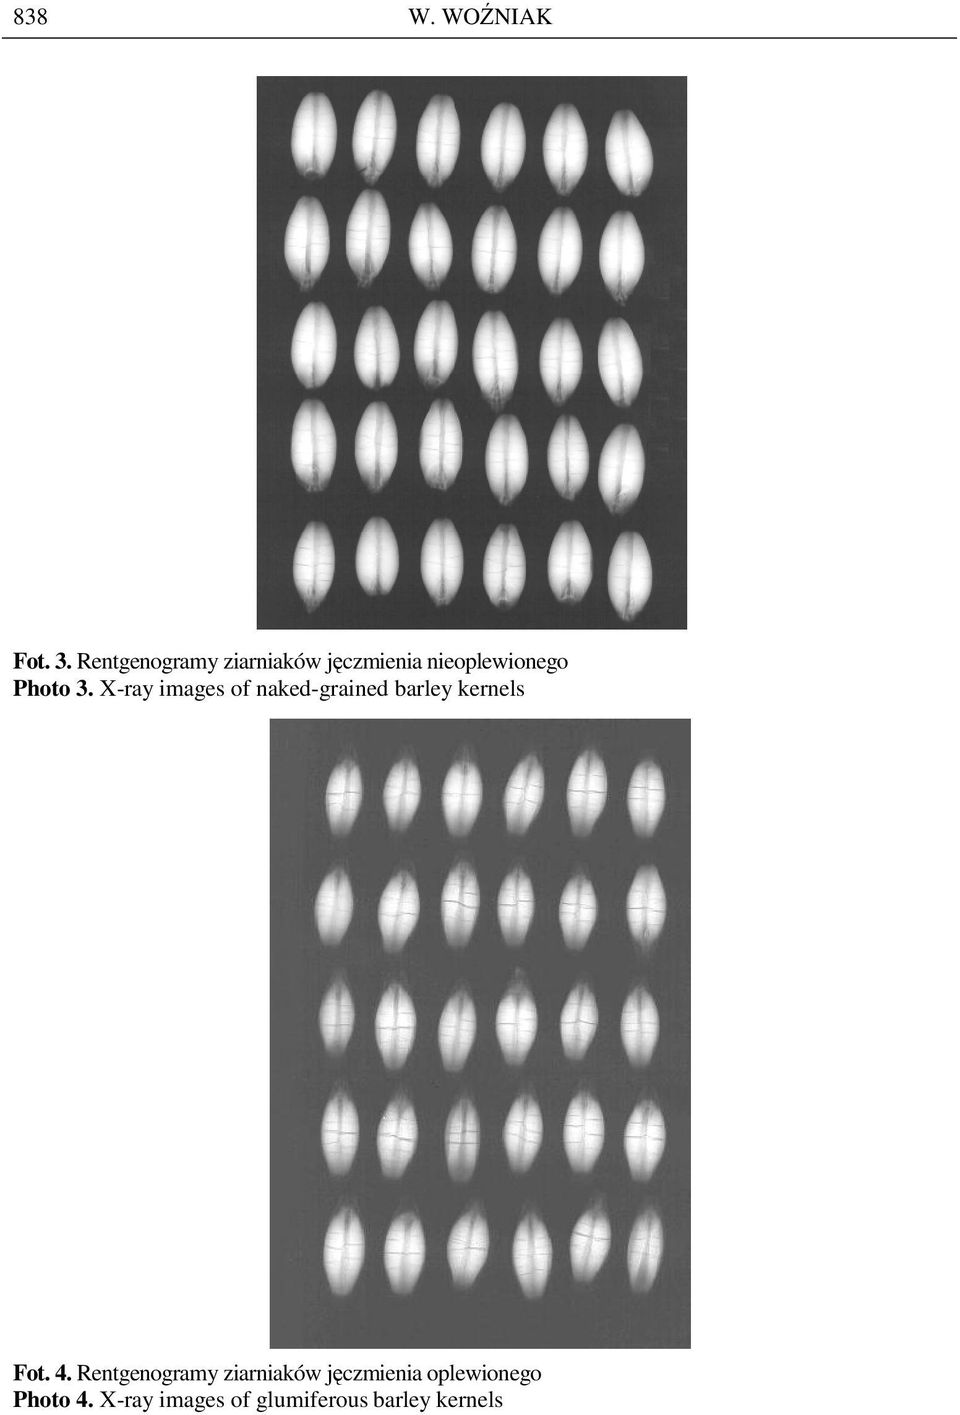 X-ray images of naked-grained barley kernels Fot. 4.